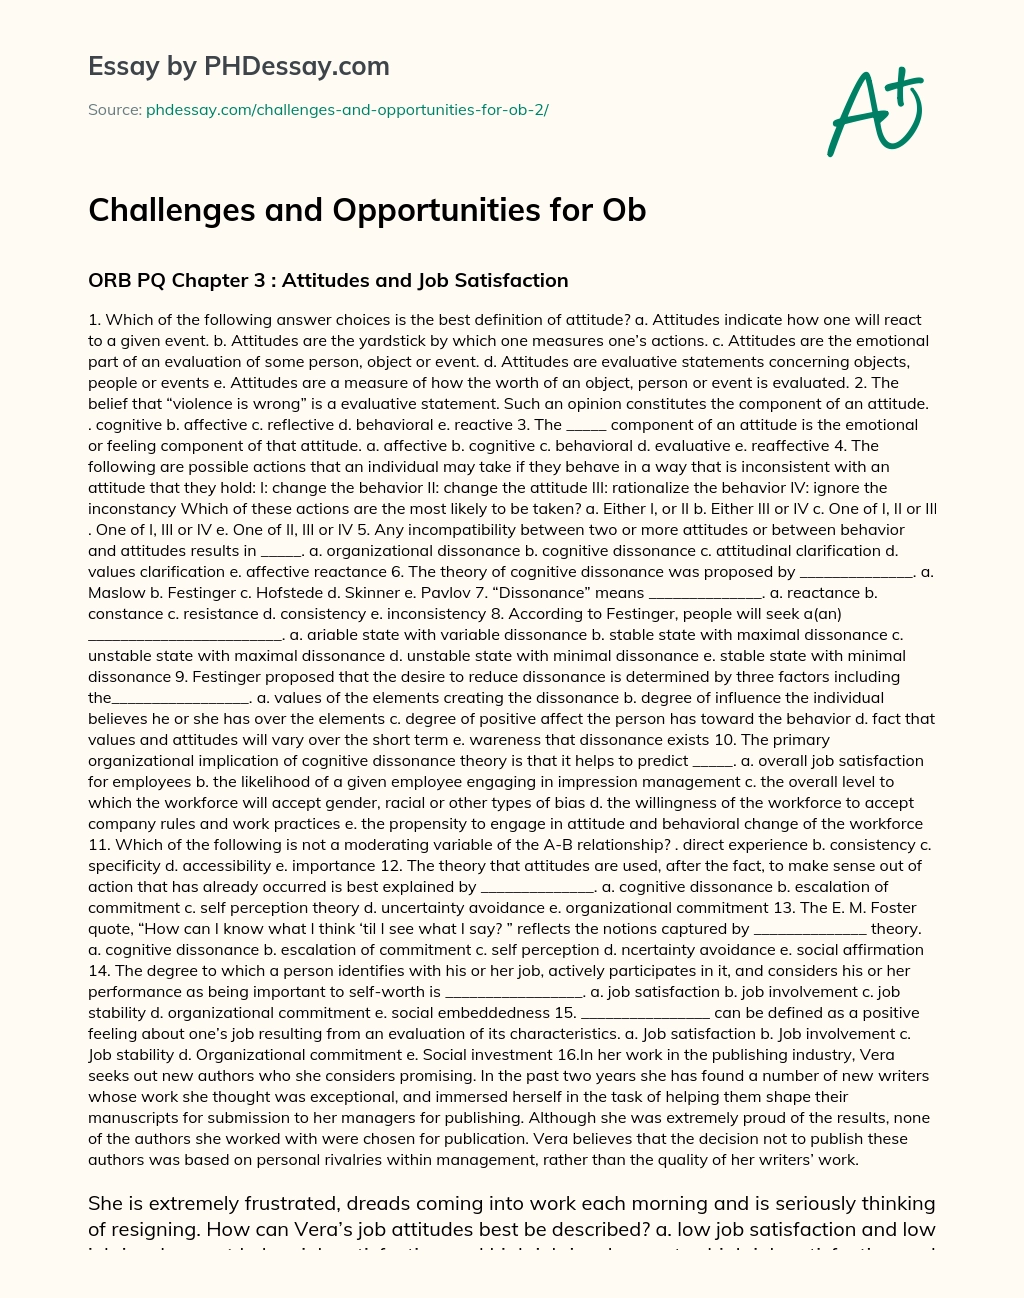 Challenges and Opportunities for Ob essay